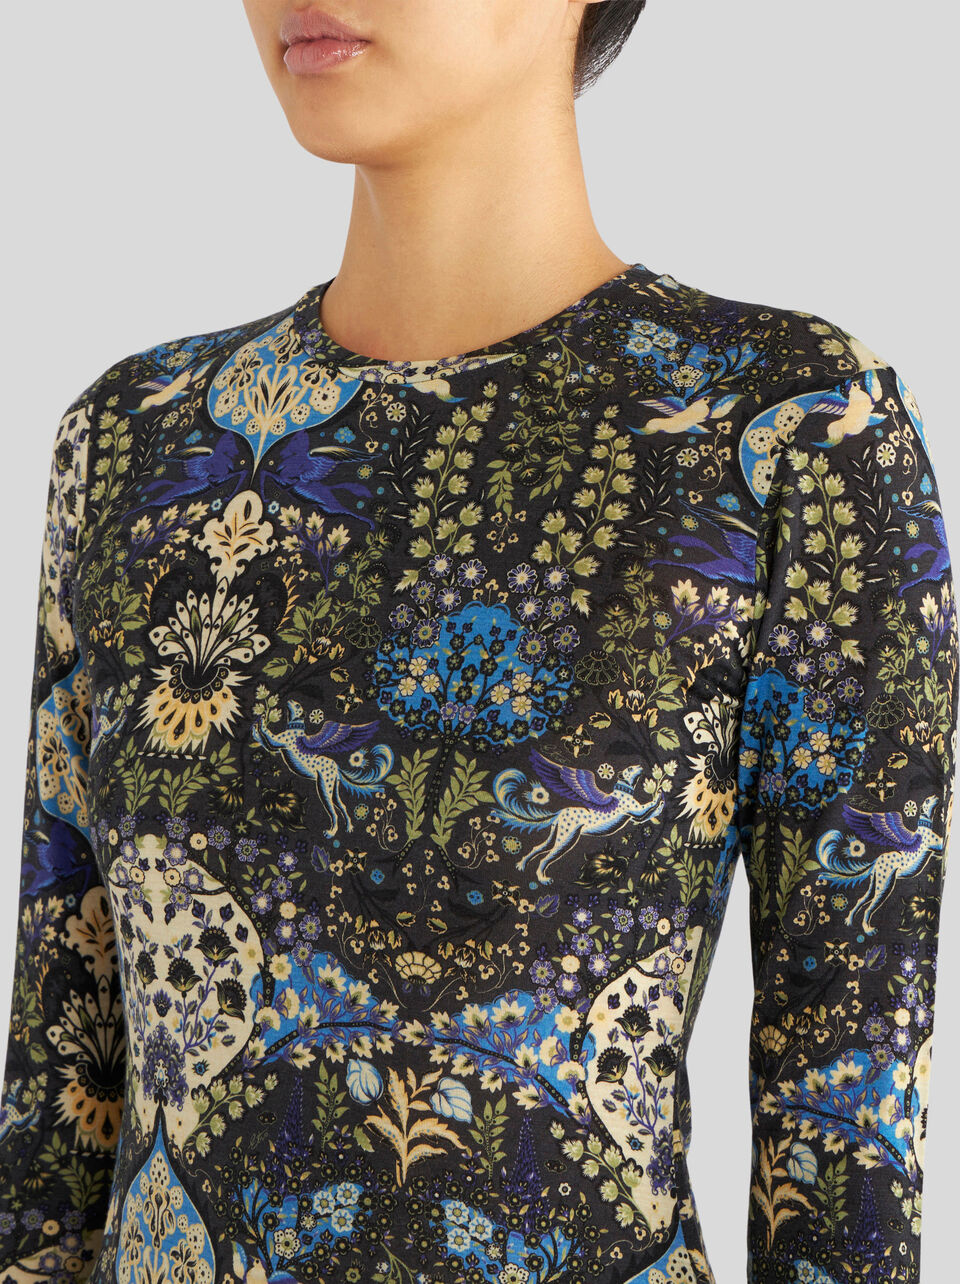 JERSEY JUMPER WITH FLORAL PRINT AND PEGASO - Black Multi